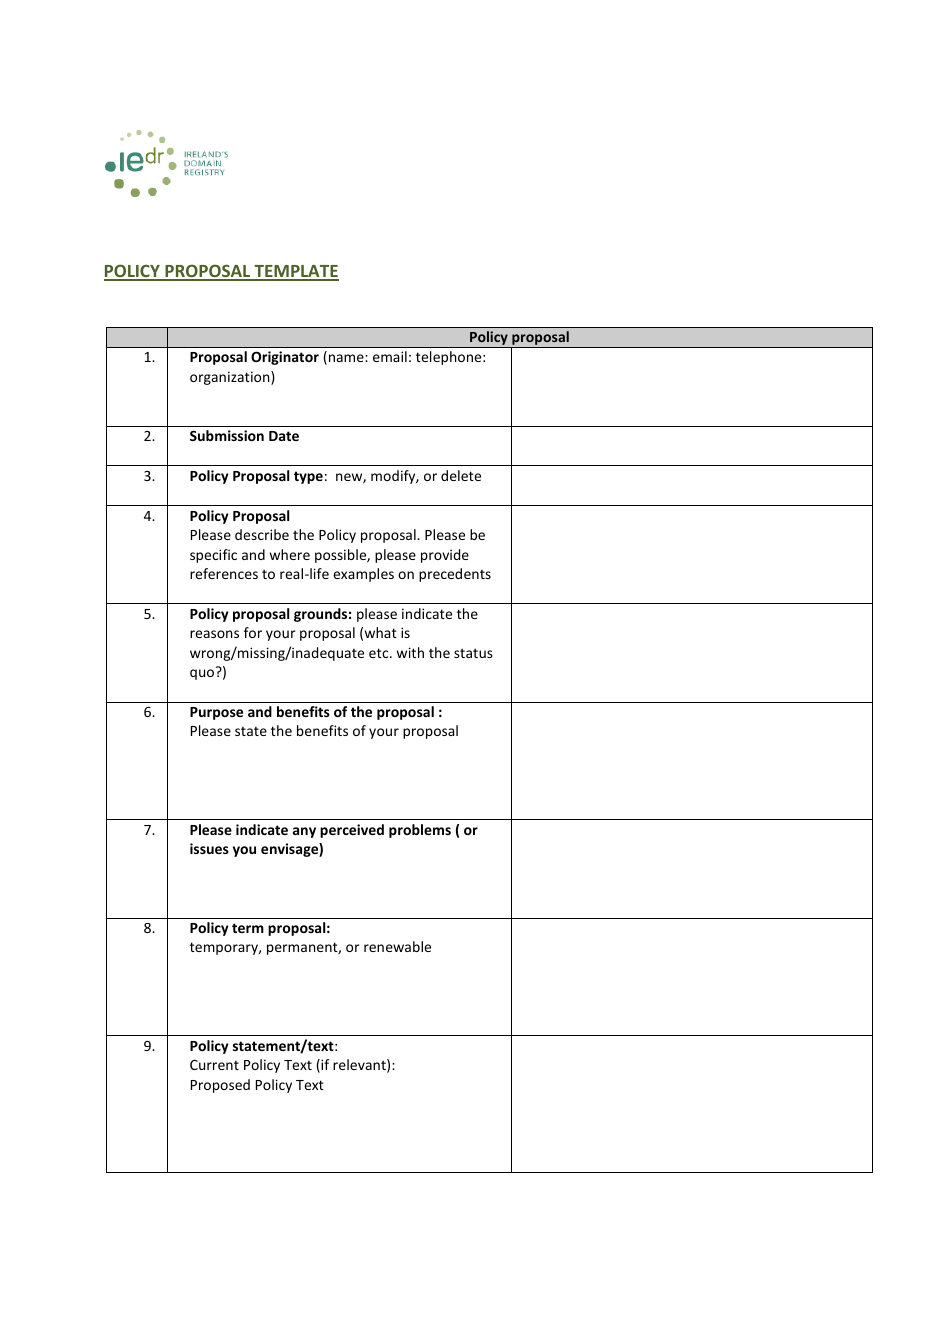 Policy Proposal Template - Ireland, Page 1